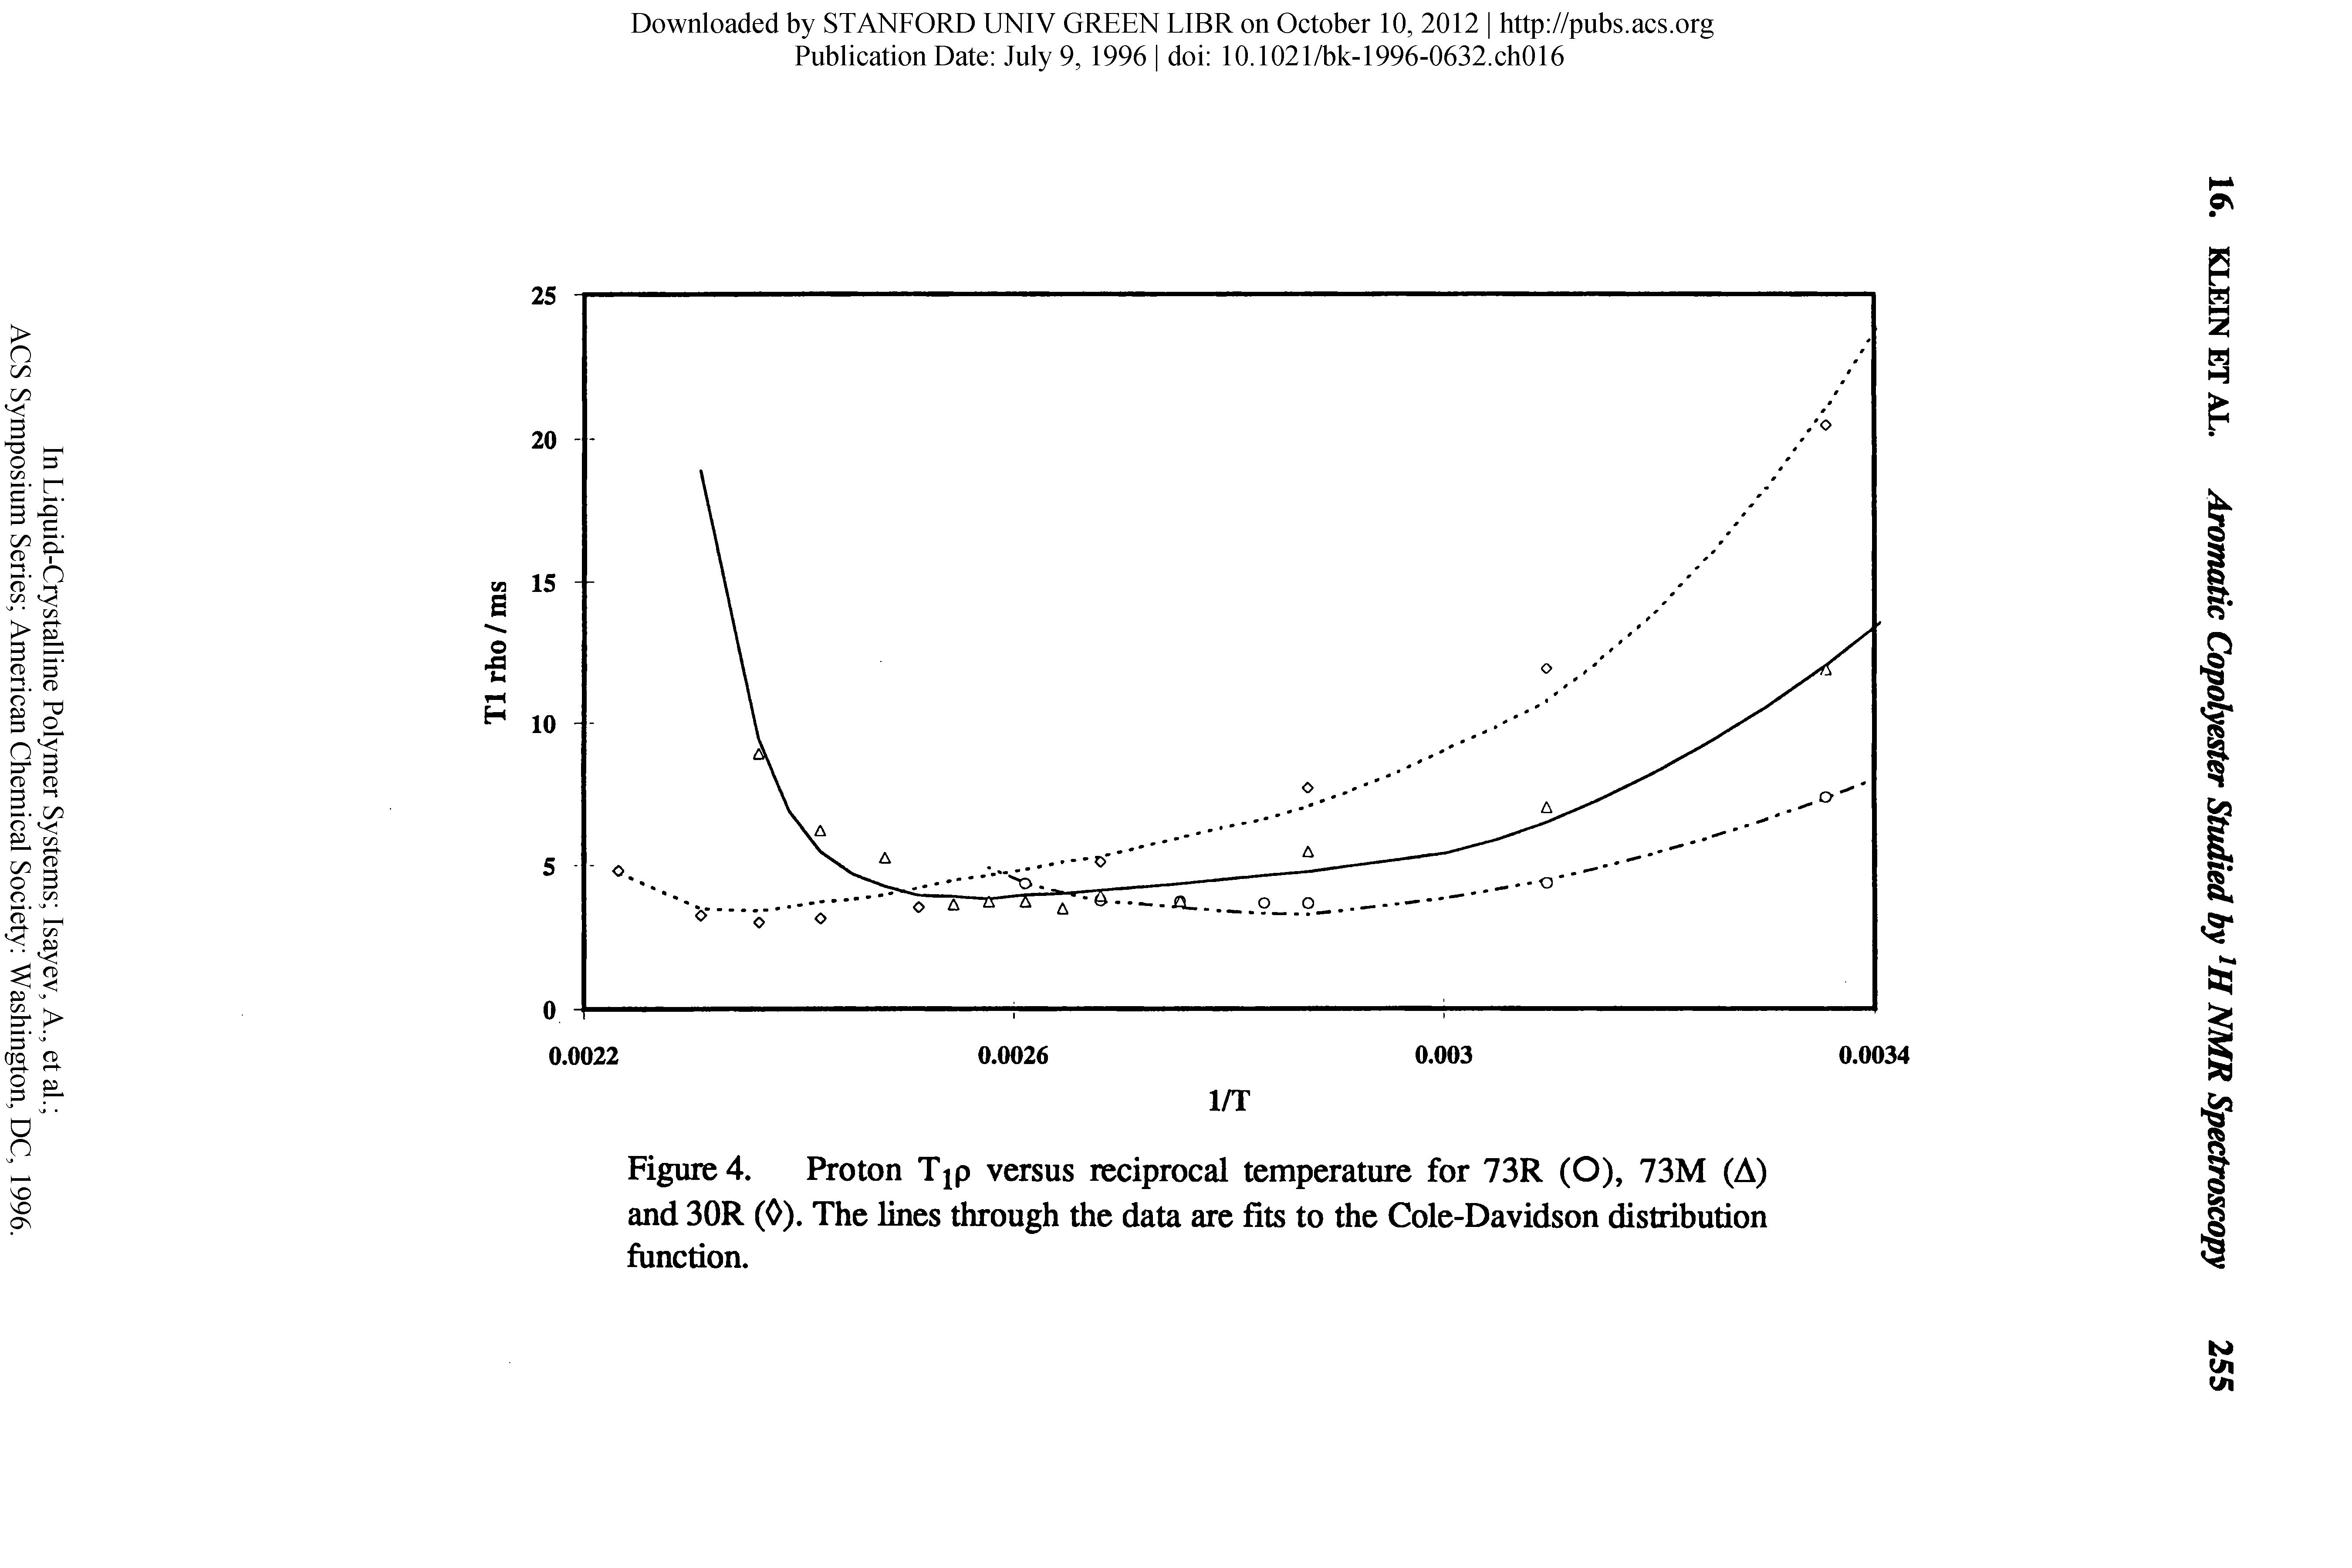 Figure 4. Proton Tjp versus reciprocal temperature for 73R (O), 73M (A) and 30R (0). The lines through the data are fits to the Cole-Davidson distribution function.